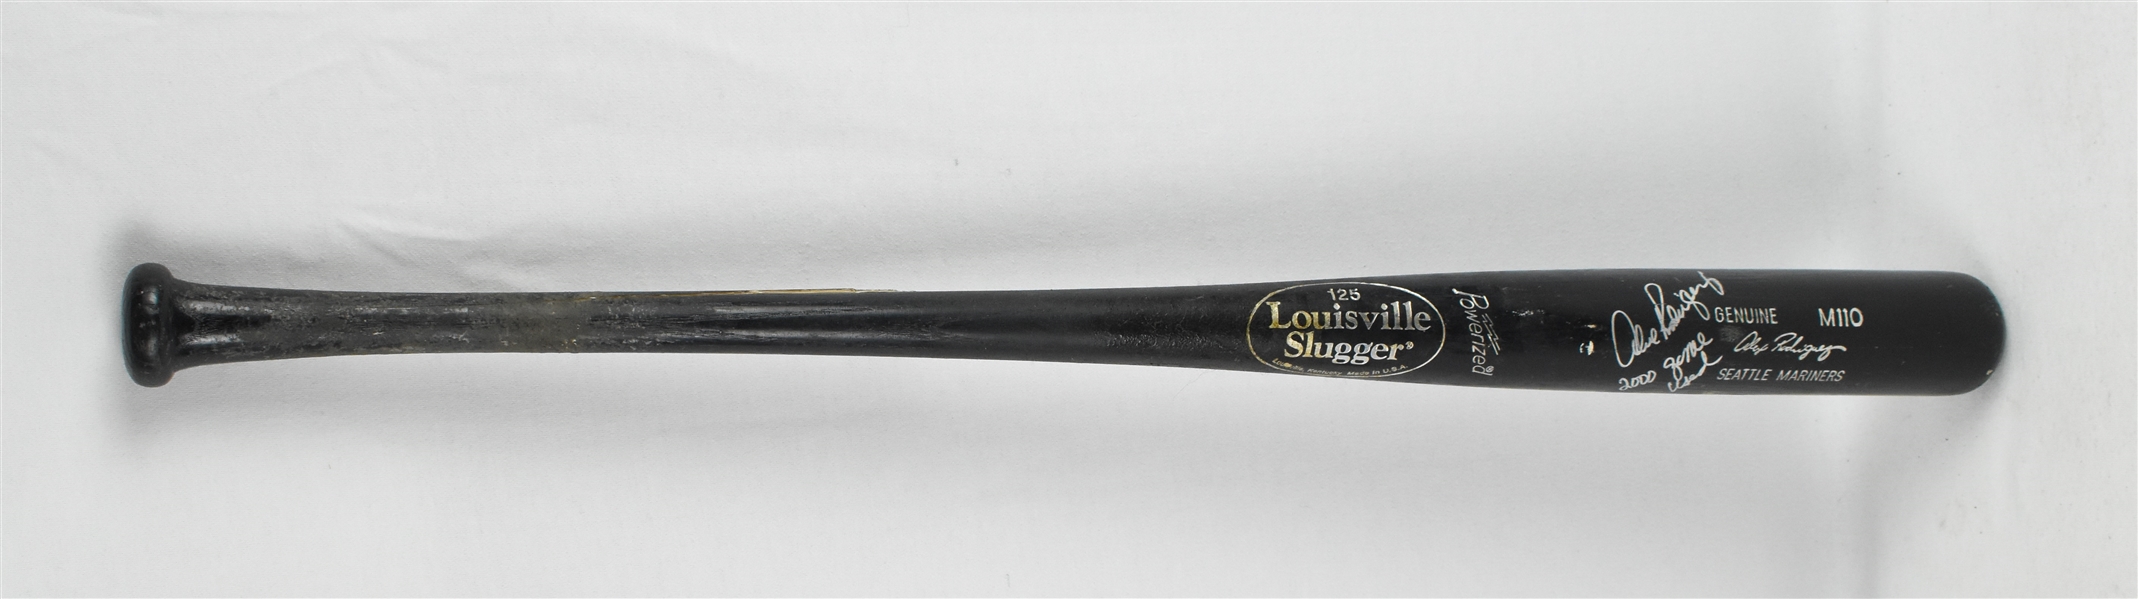 Alex Rodriguez 2000 Seattle Mariners Game Used & Autographed Bat